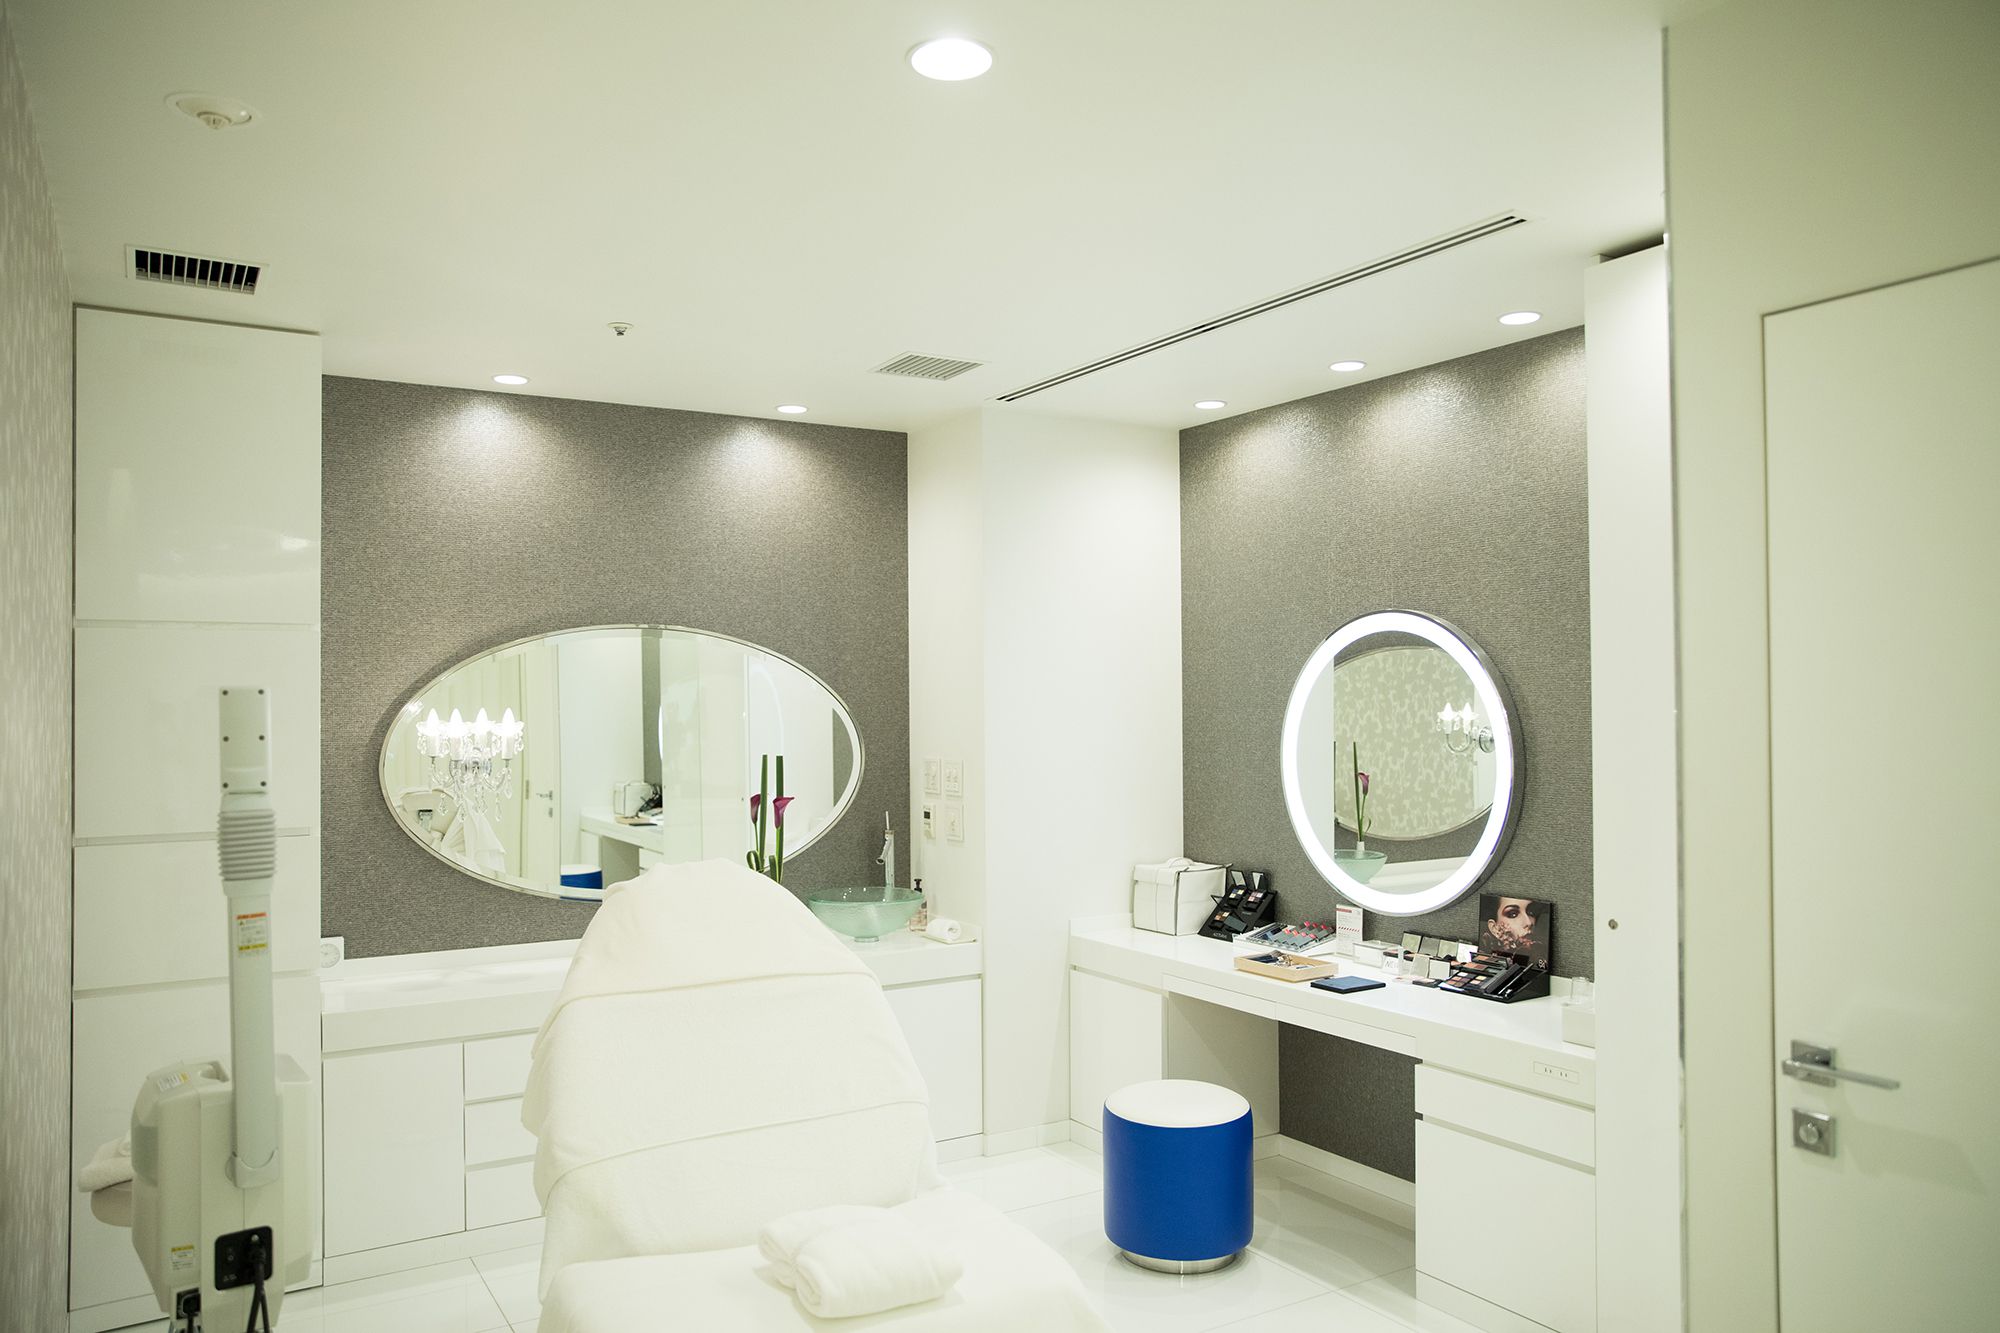 The Beauty Treatment Room is on the Basement Level. The popular course is B.A Premium L